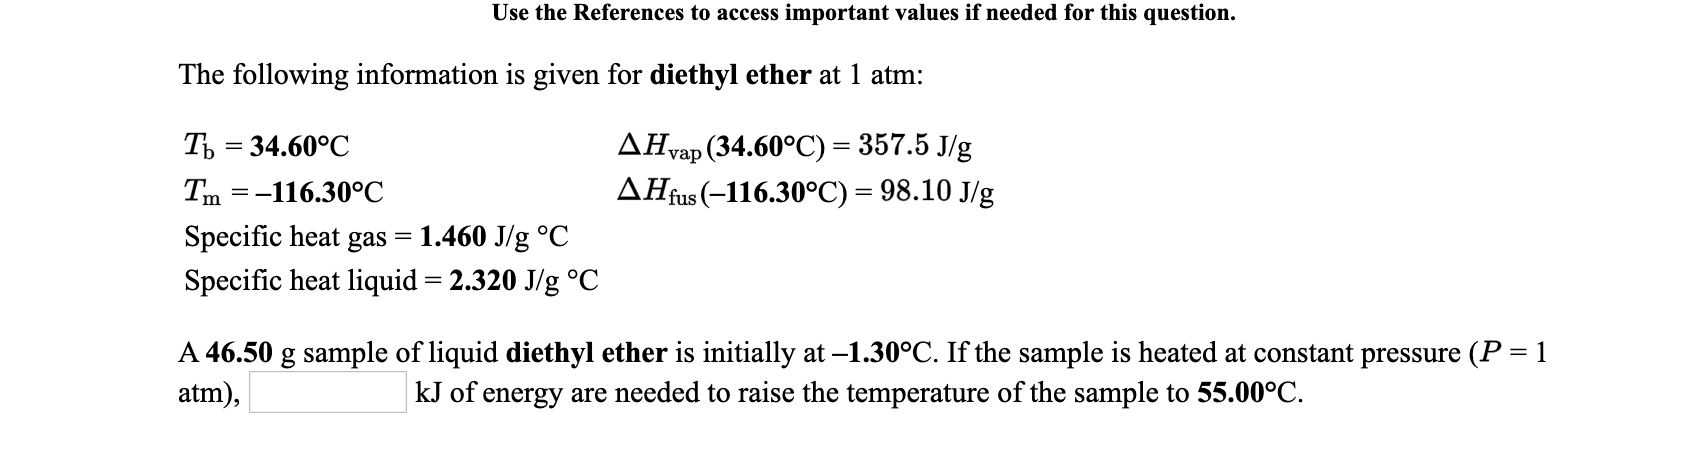 Use the References to access important values if needed for this question.
The following information is given for diethyl ether at 1 atm:
Ть 3 34.60°C
ДНap (34.60°C) %3 357.5 Jg
Tm =-116.30°C
AHfus (-116.30°C) = 98.10 J/g
Specific heat gas
1.460 J/g °C
Specific heat liquid = 2.320 J/g °C
A 46.50 g sample of liquid diethyl ether is initially at –1.30°C. If the sample is heated at constant pressure (P = 1
atm),
kJ of
energy are needed to raise the temperature of the sample to 55.00°C.
